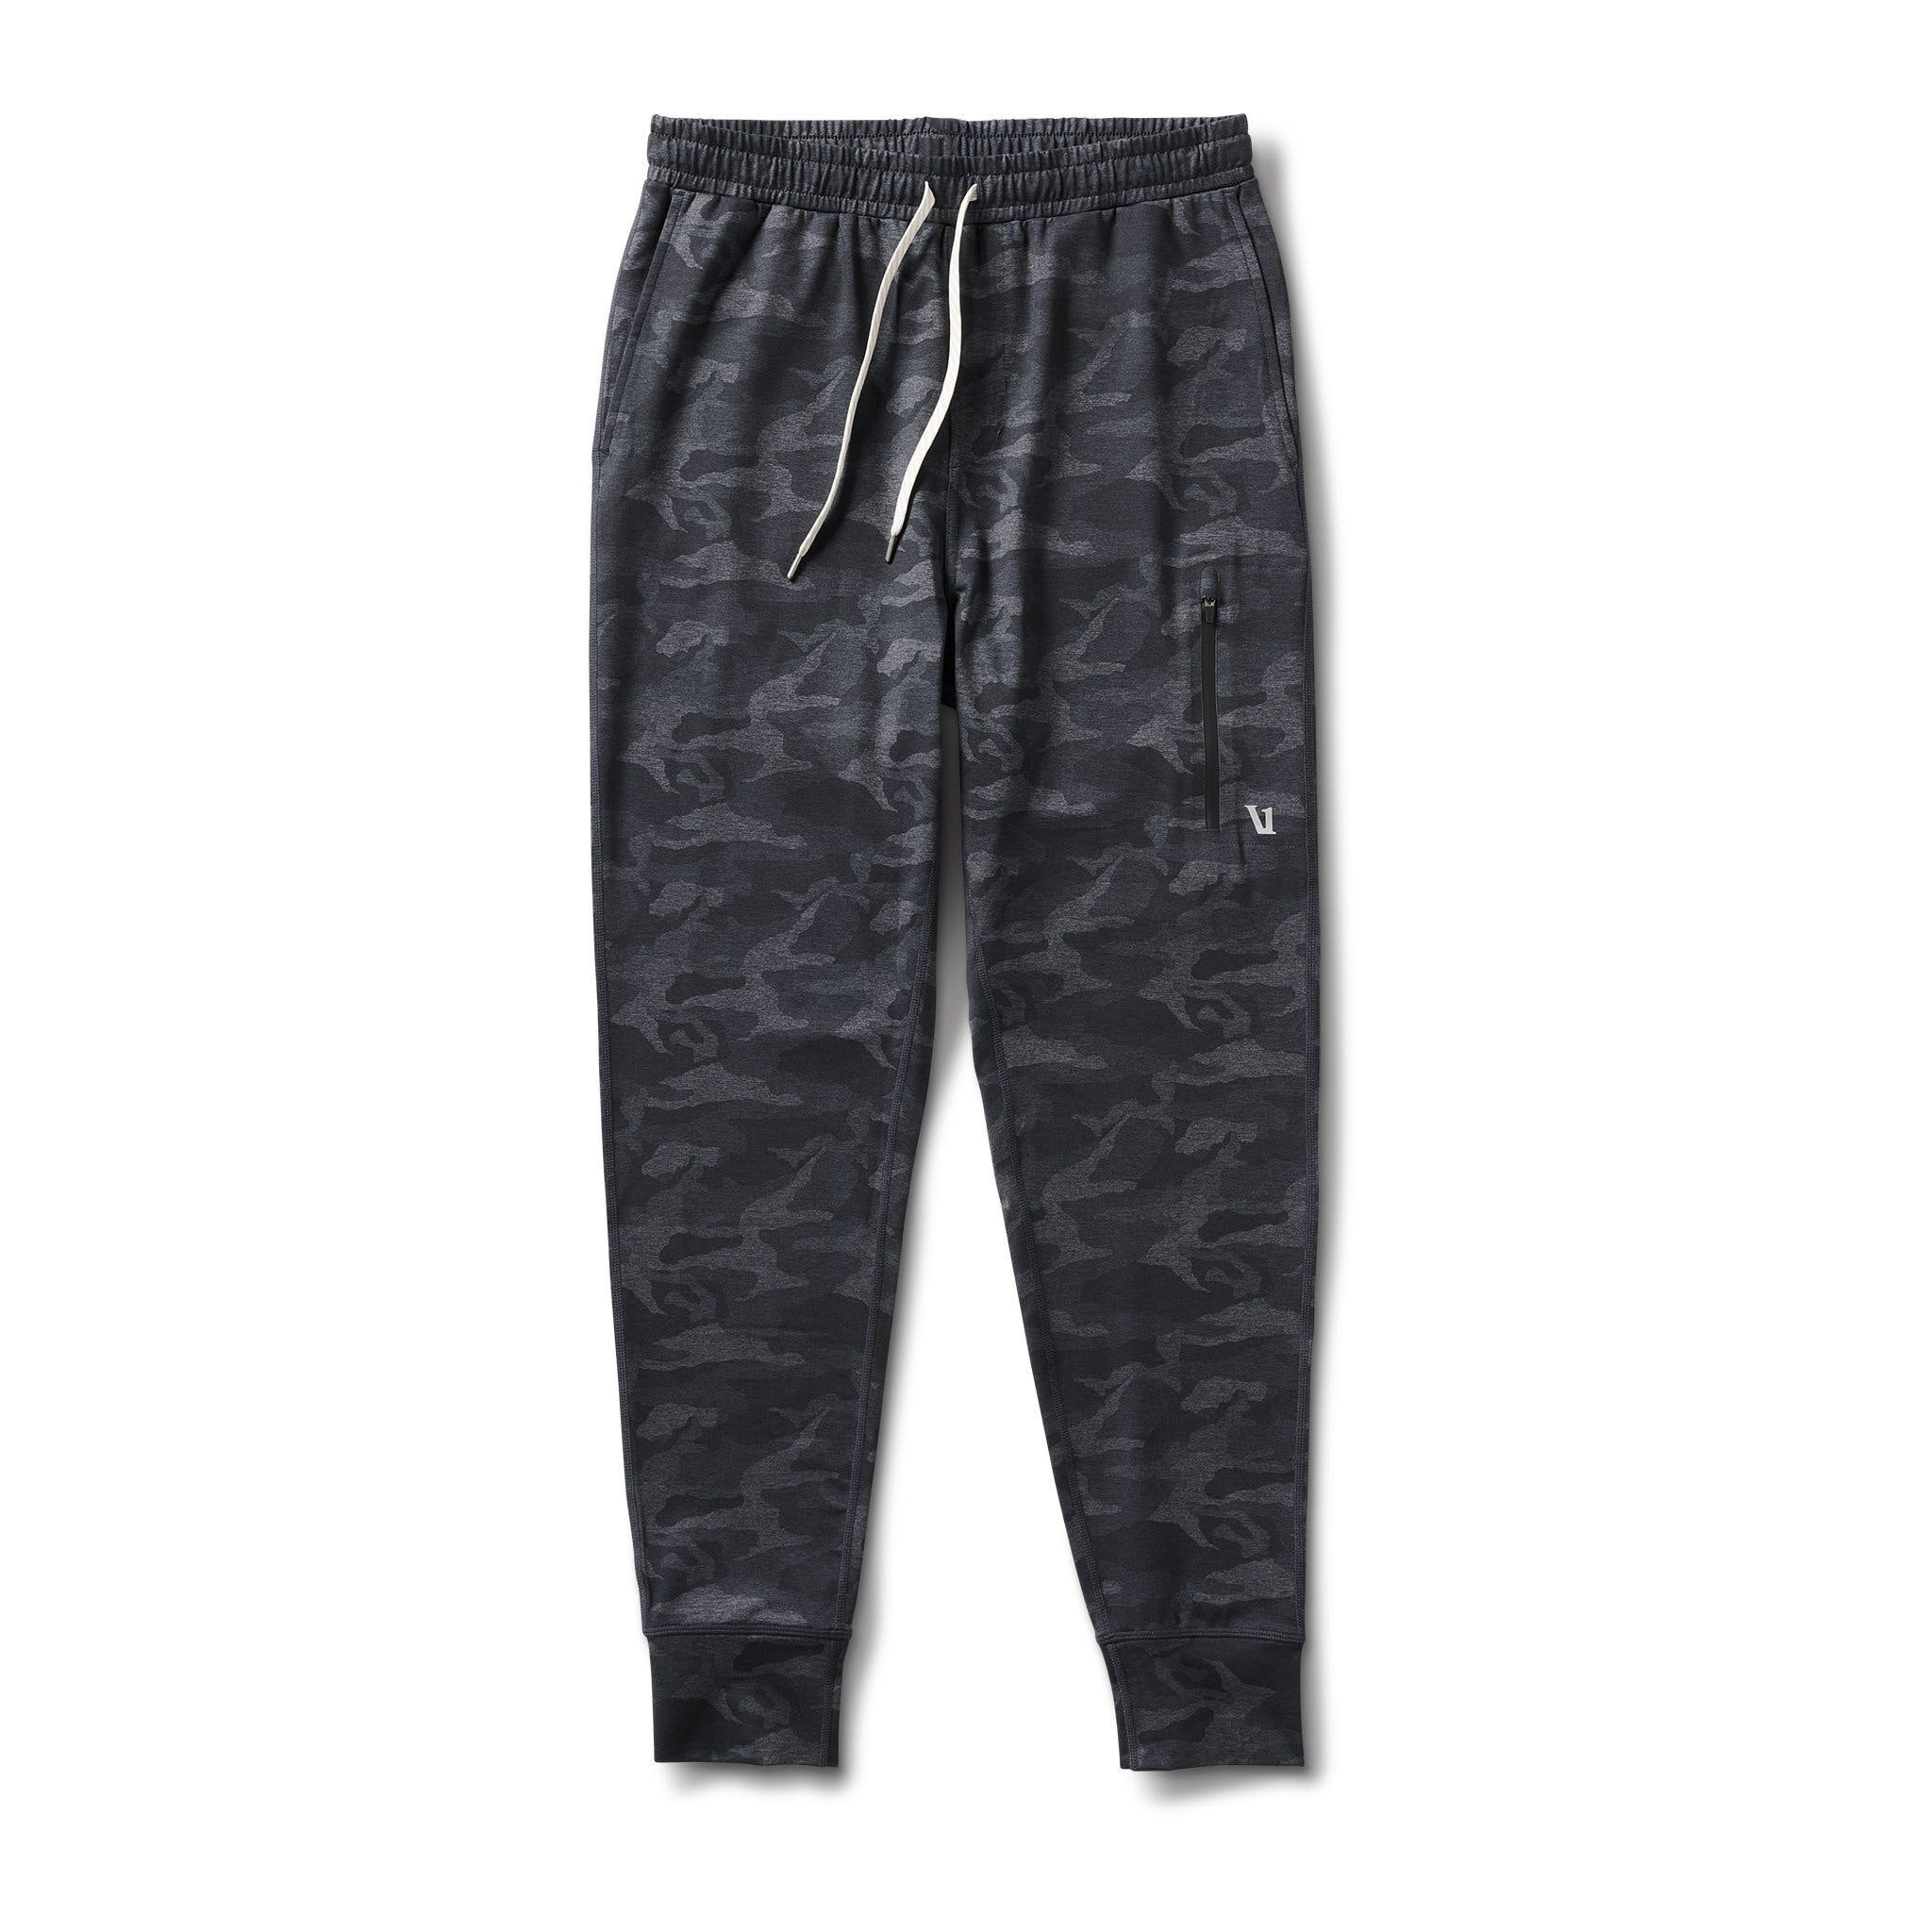 Daily Ritual Black Gray Casual Pants Size M - 48% off